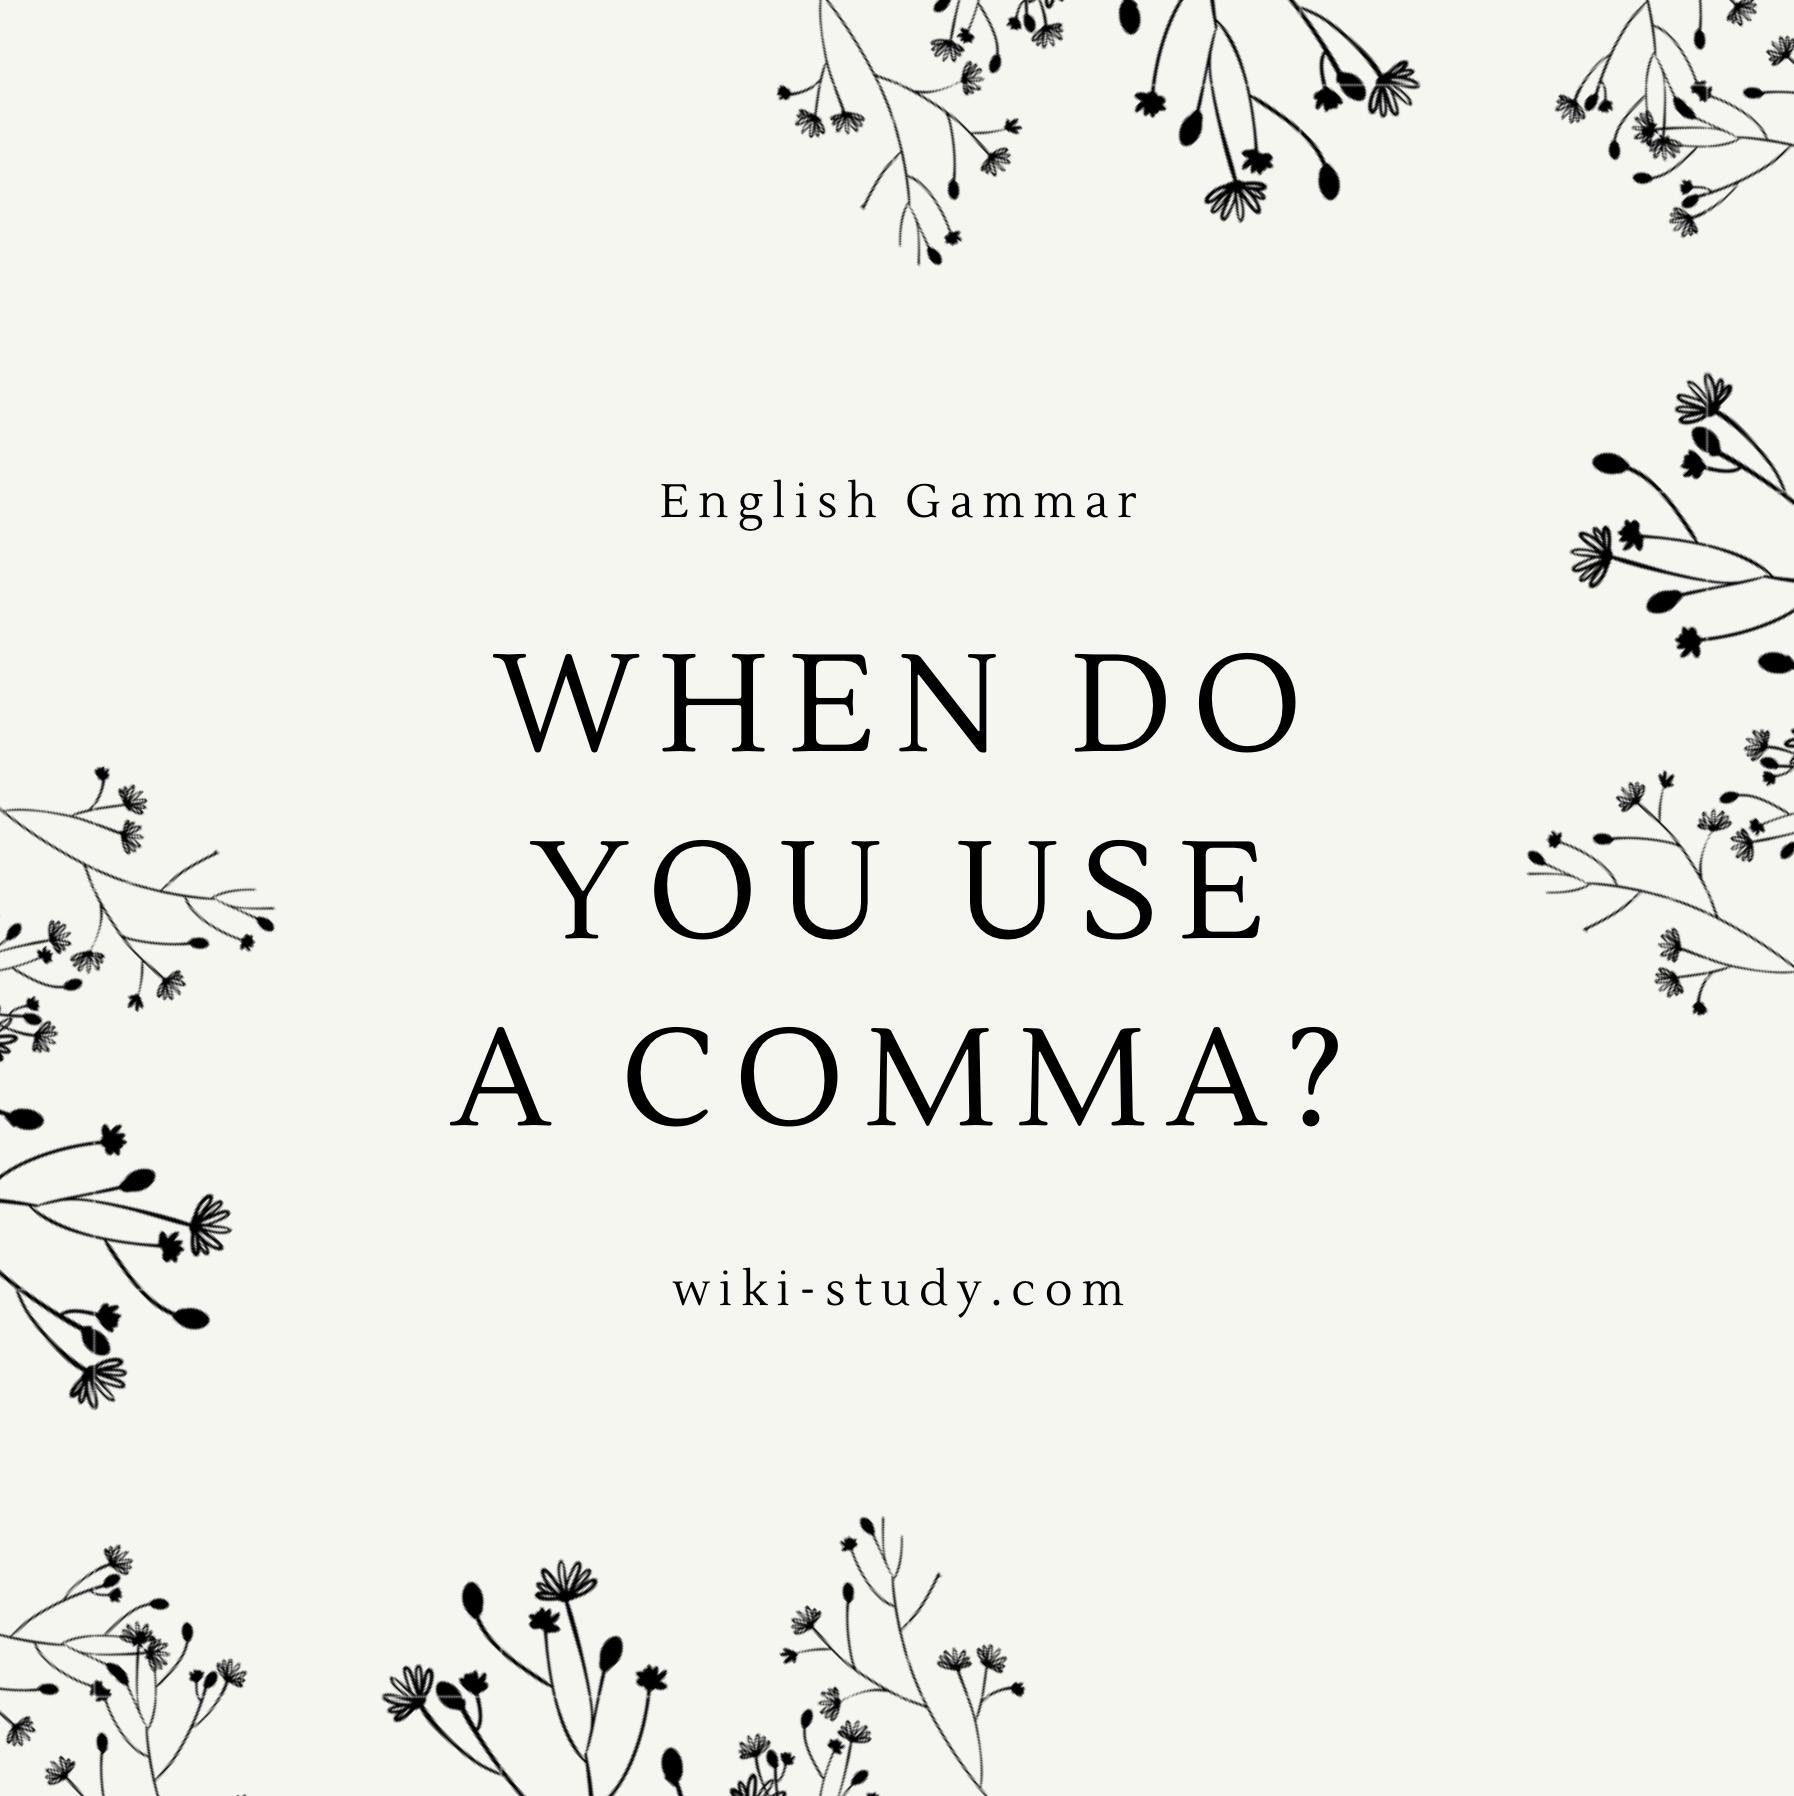 When do you use a comma?